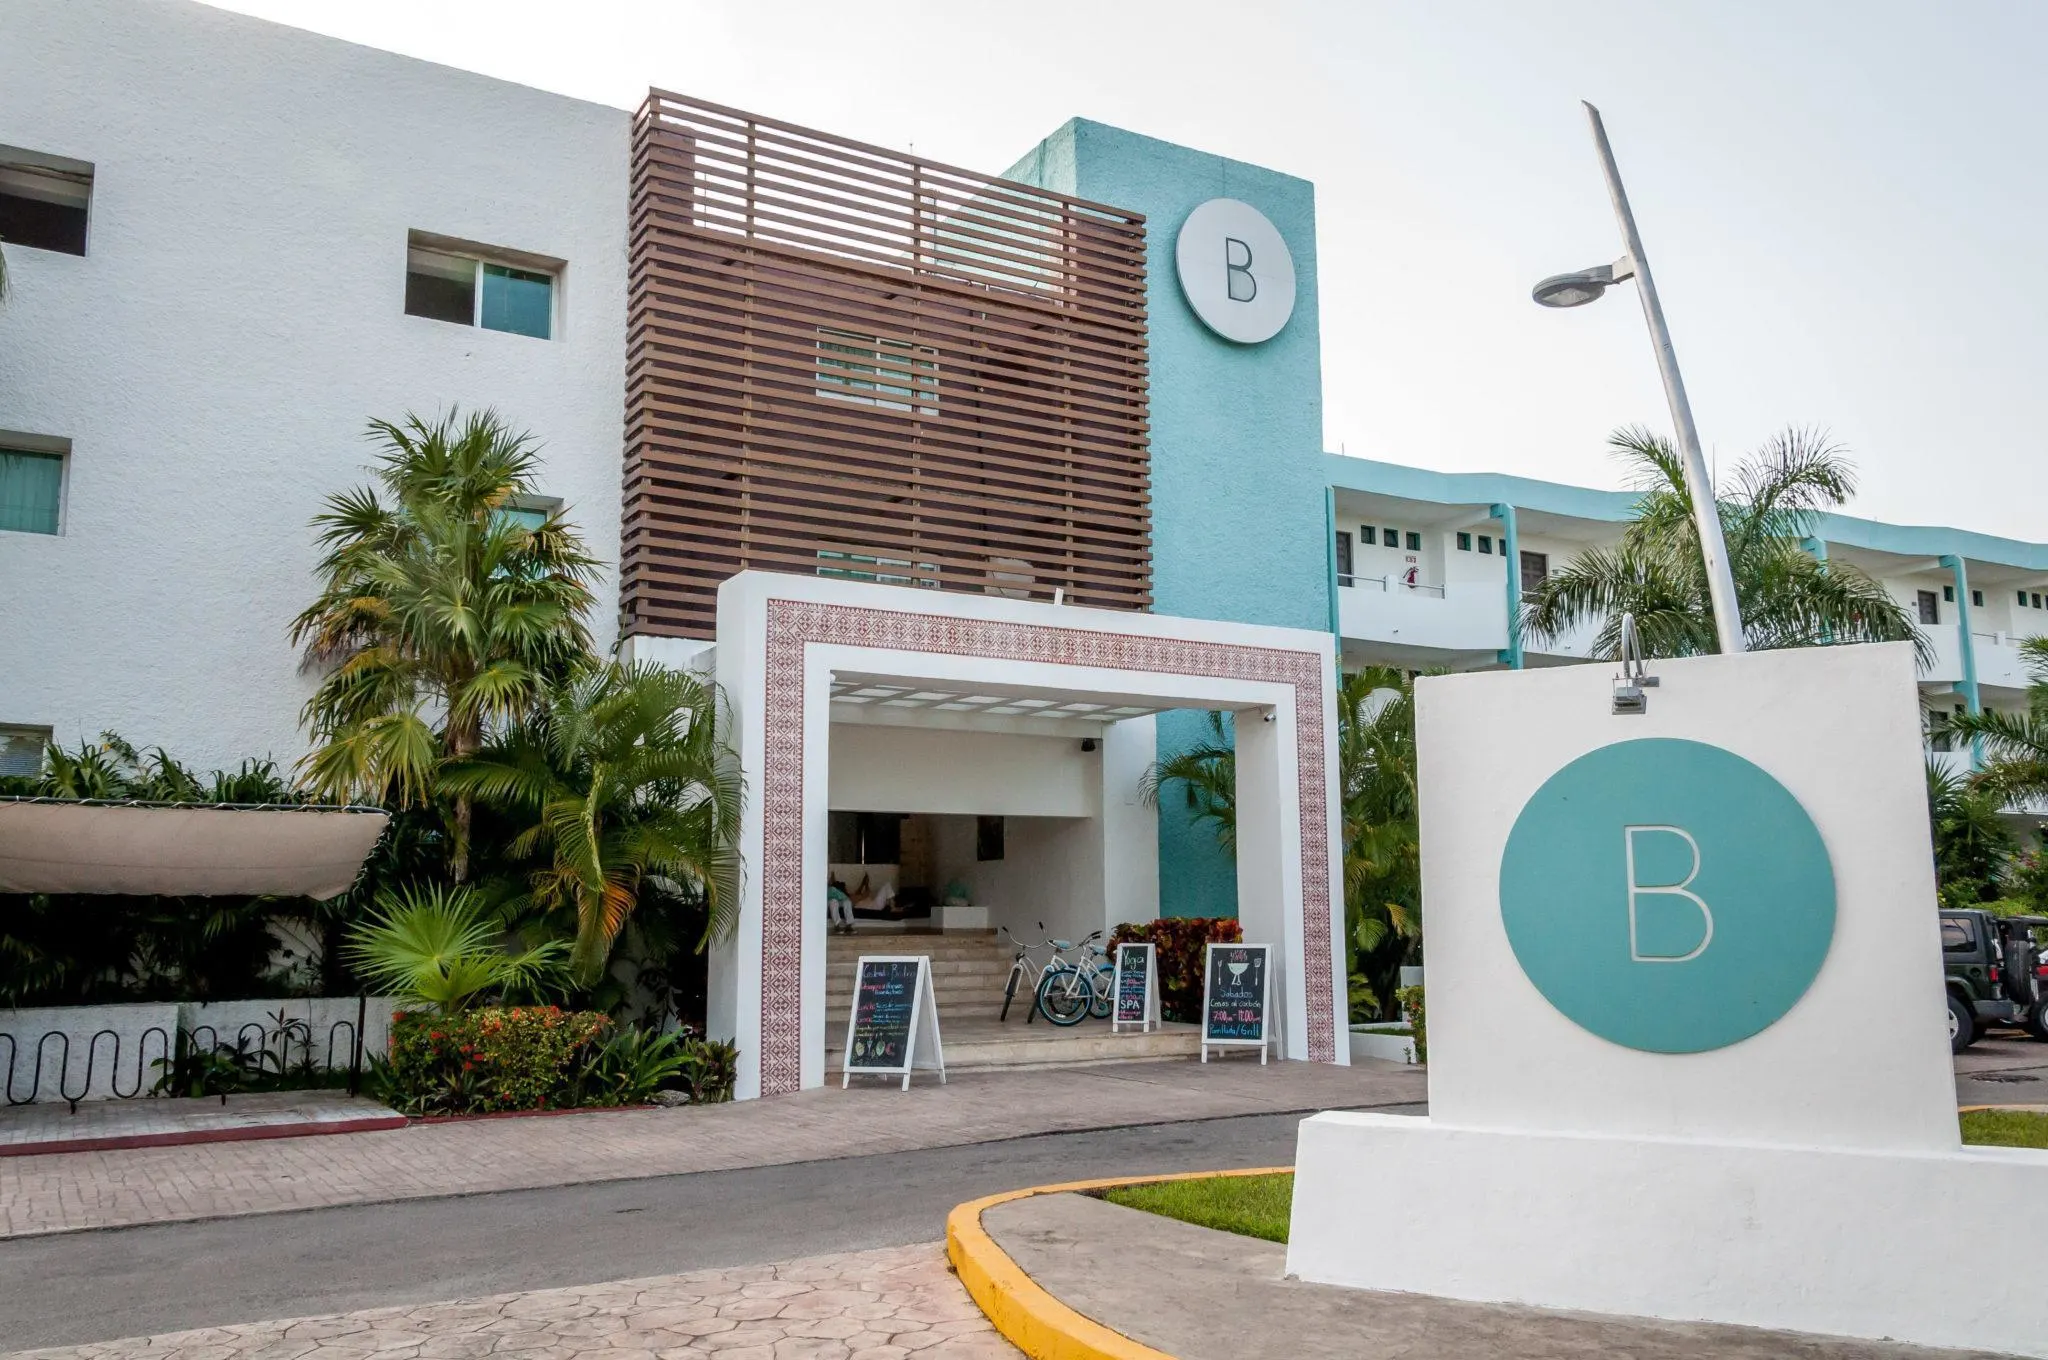 The front of the Hotel B Cozumel from the street